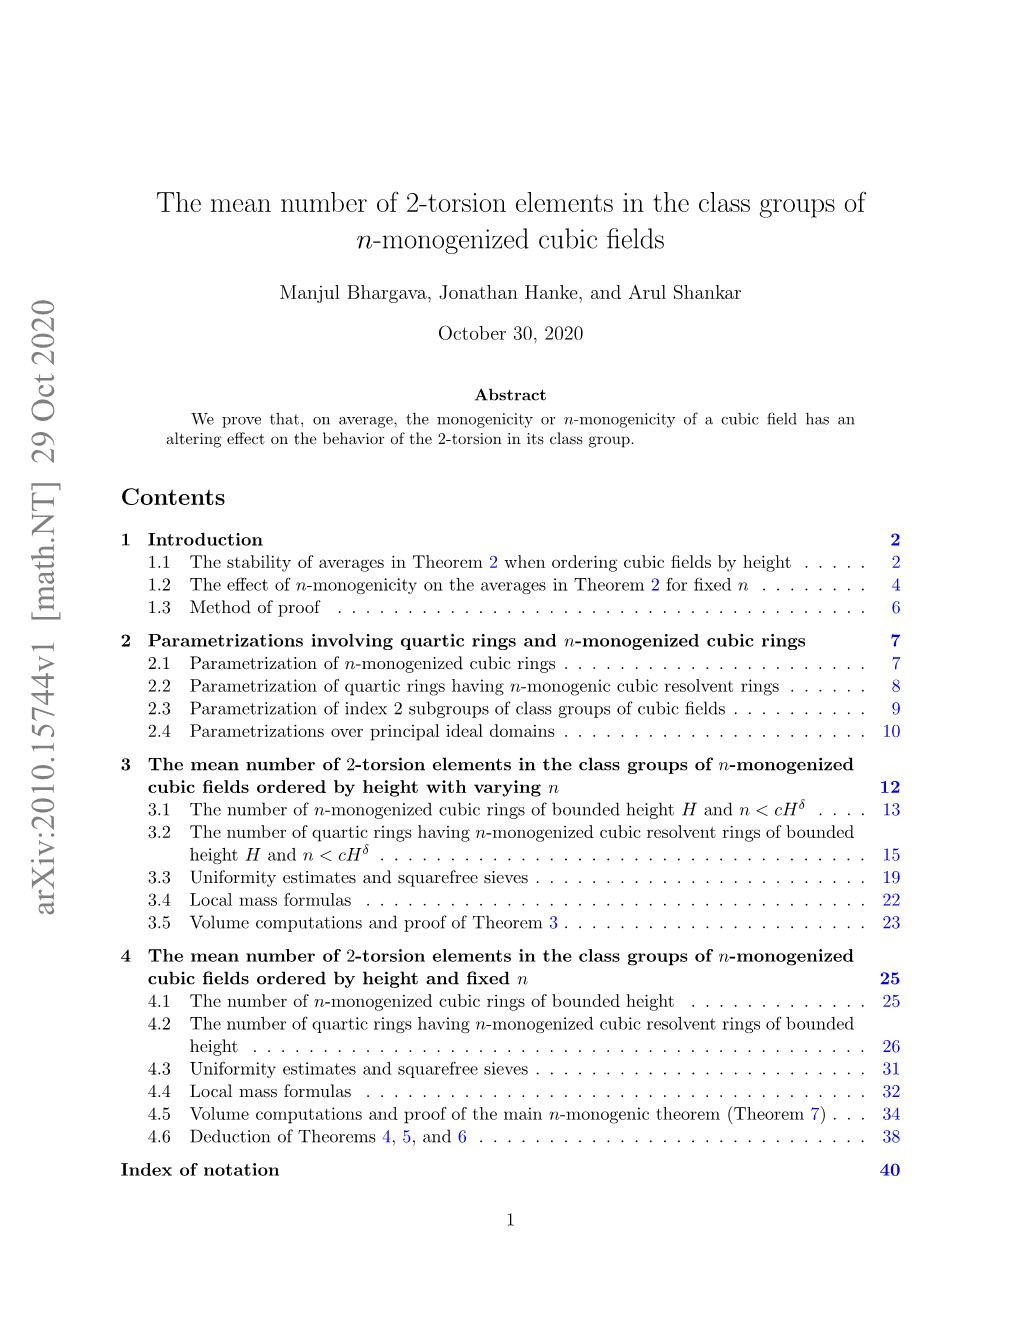 The Mean Number of 2-Torsion Elements in the Class Groups of $ N